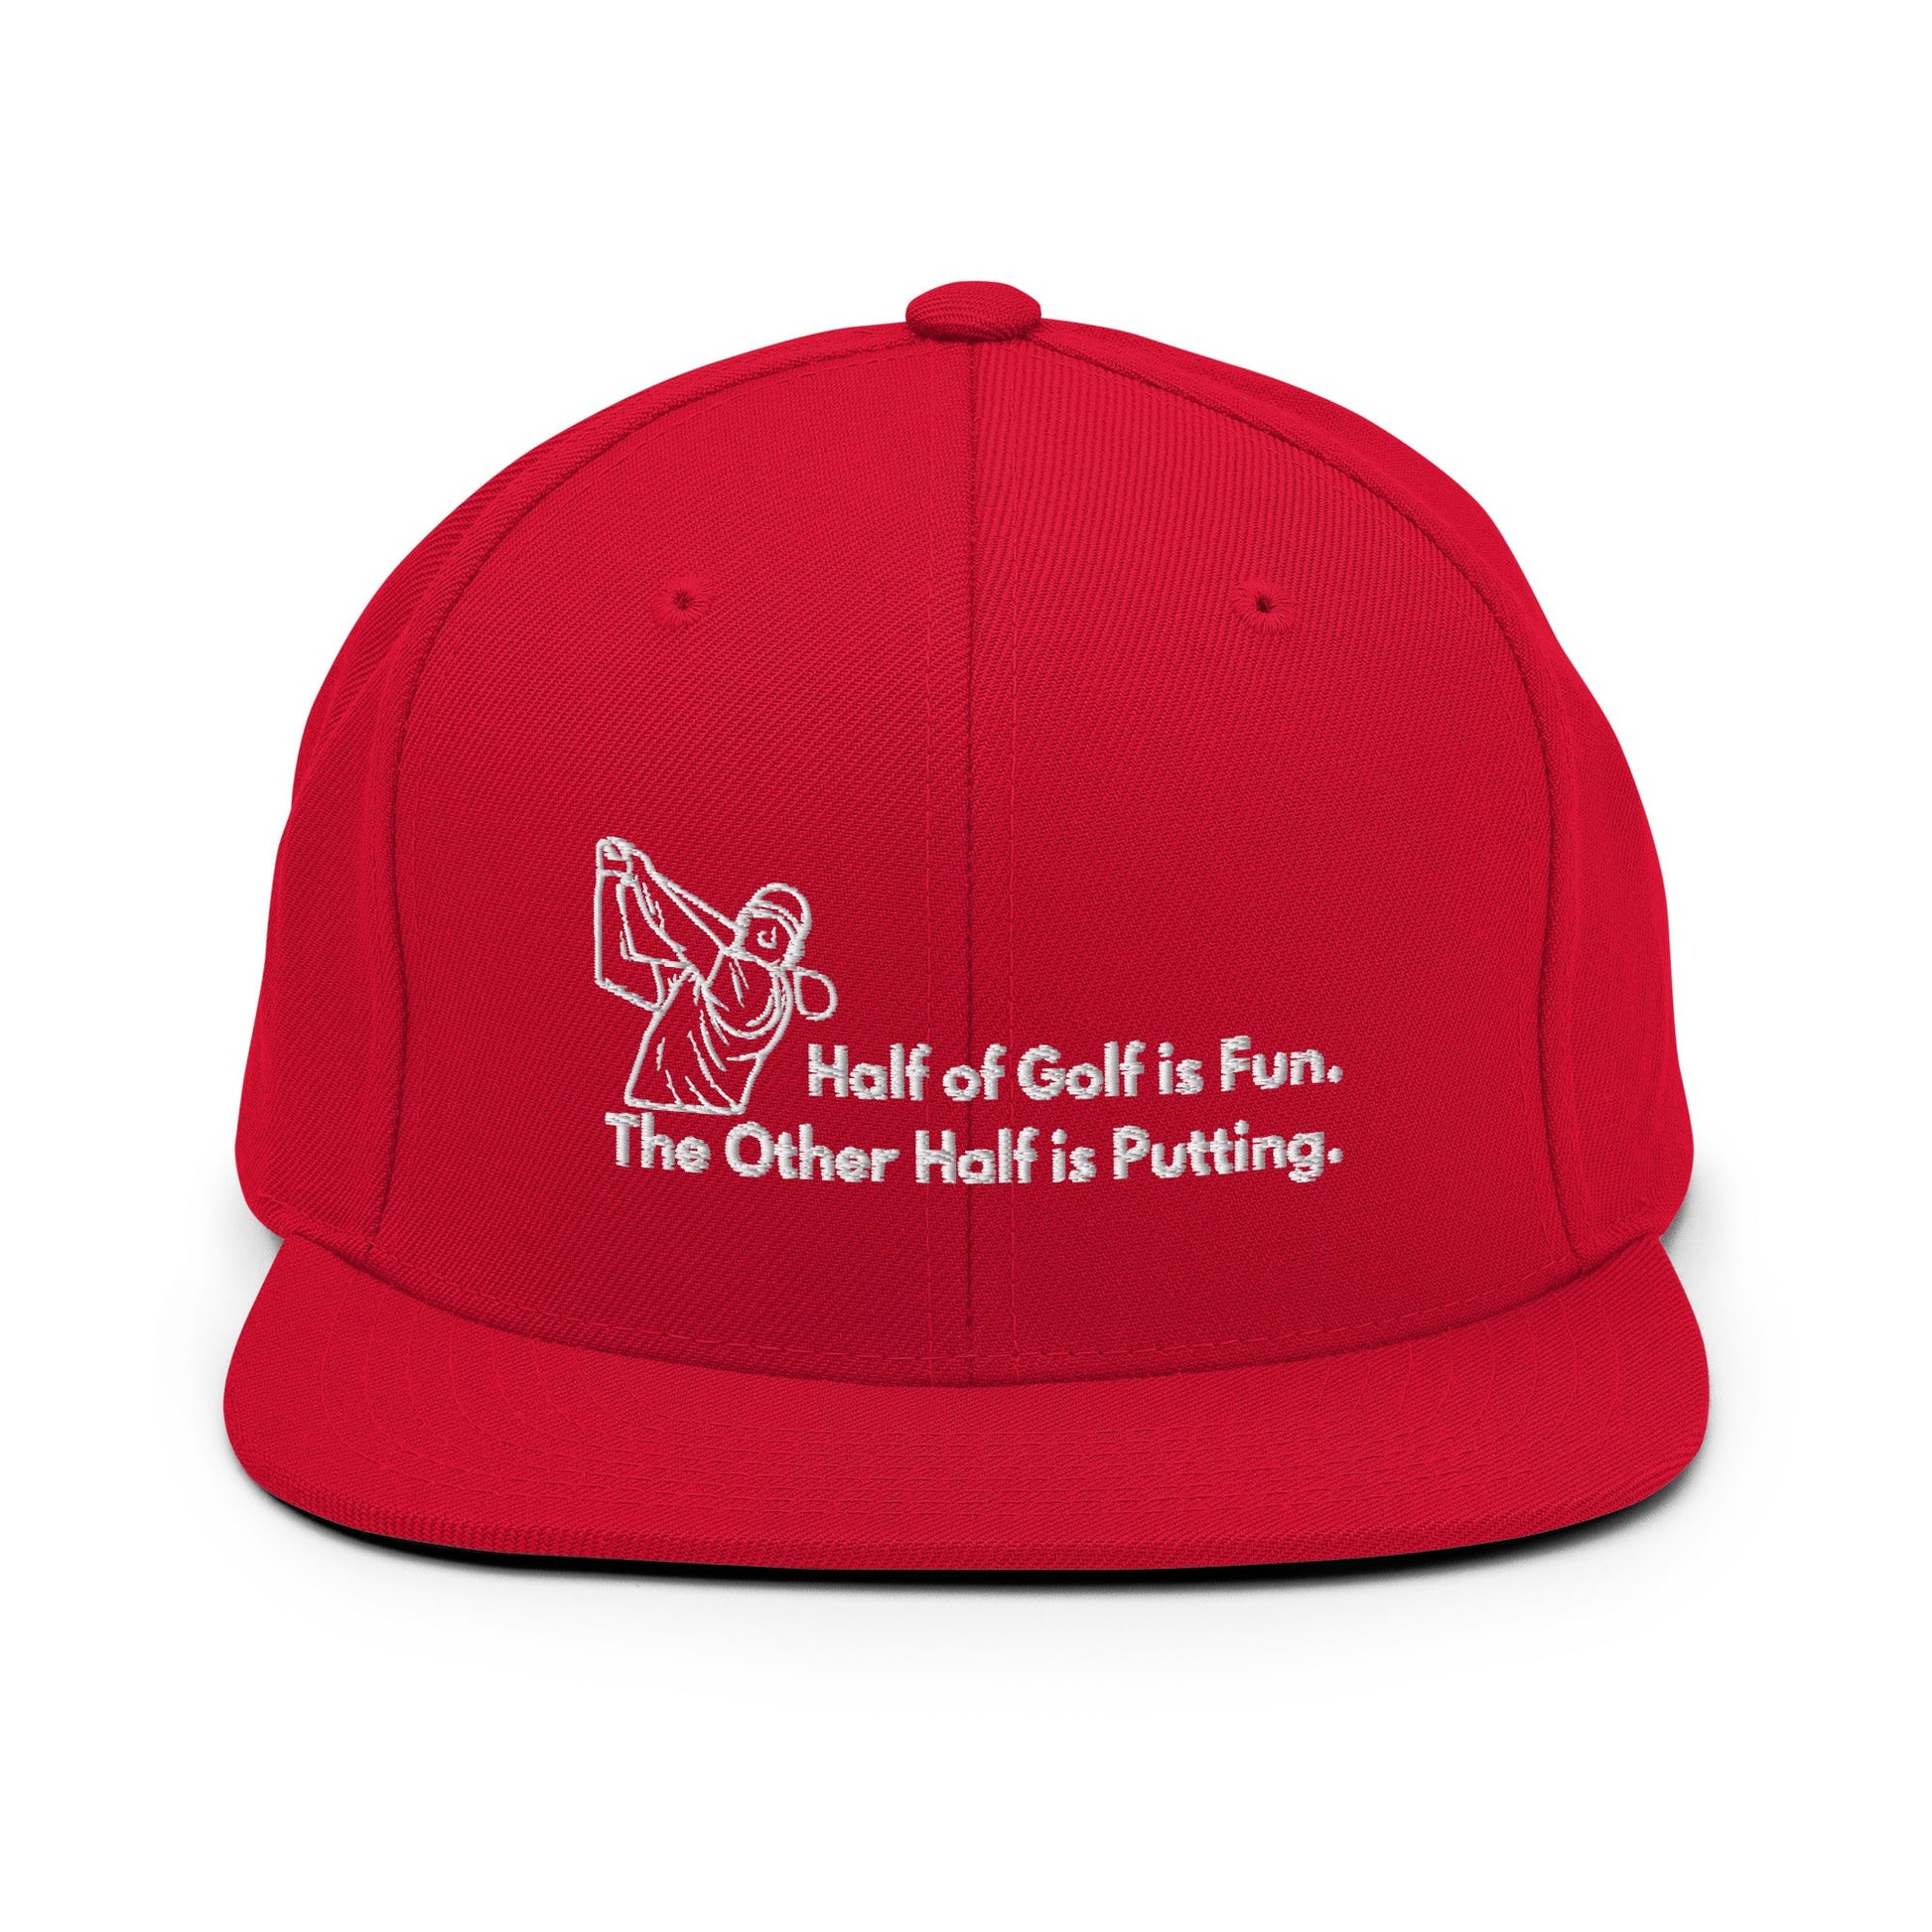 Funny Golfer Gifts  Snapback Hat Red Half of Golf is Fun Snapback Hat